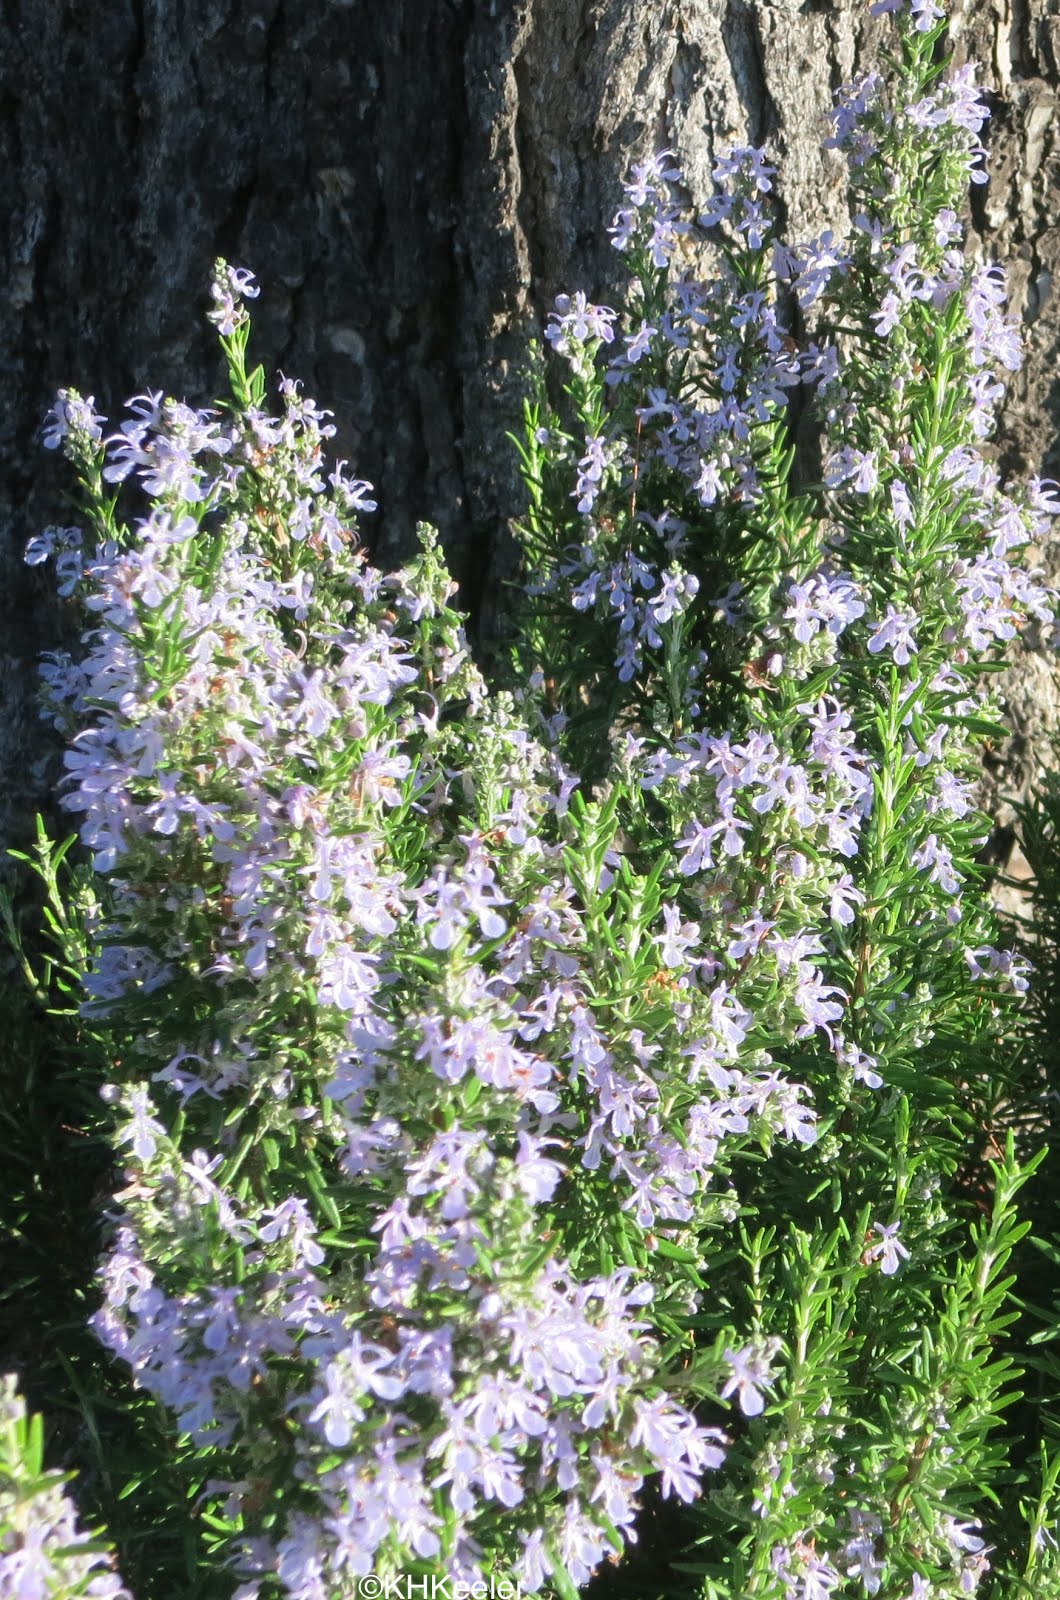 Rosemary in the Life of Jesus, Mary and Joseph